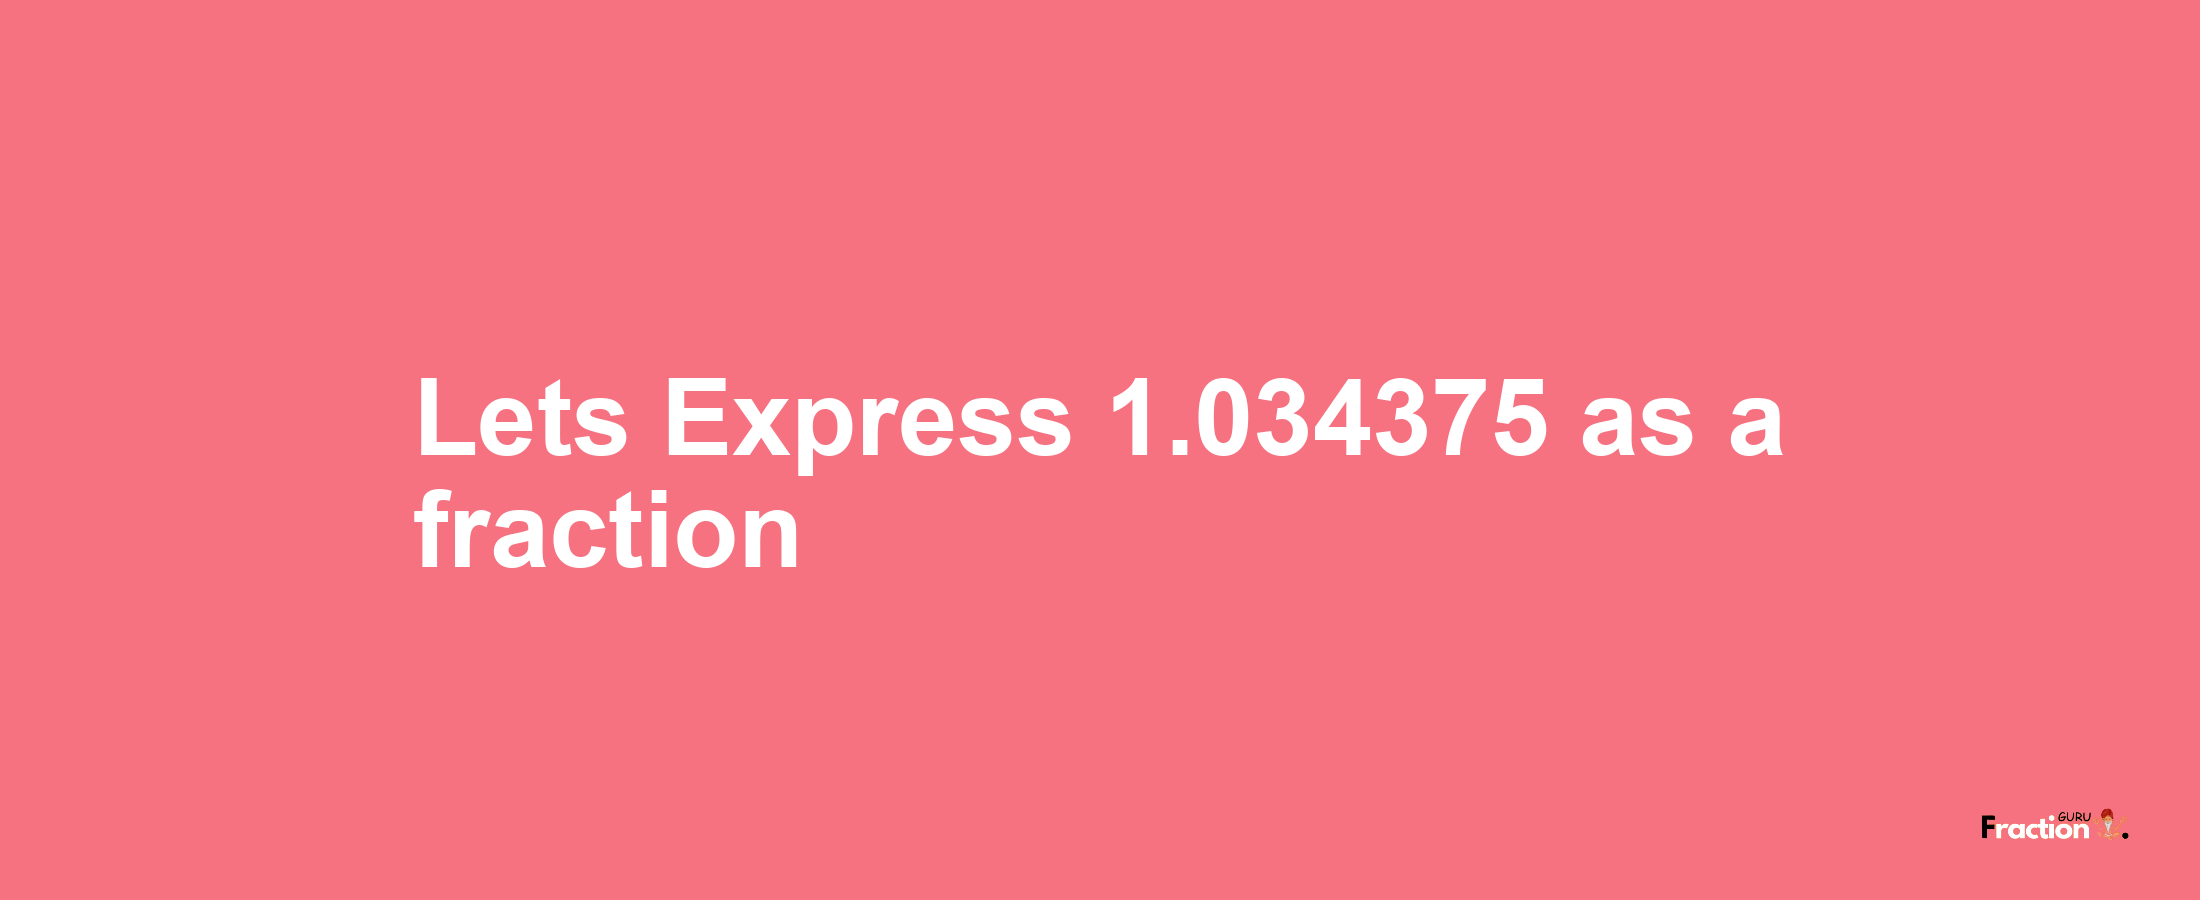 Lets Express 1.034375 as afraction